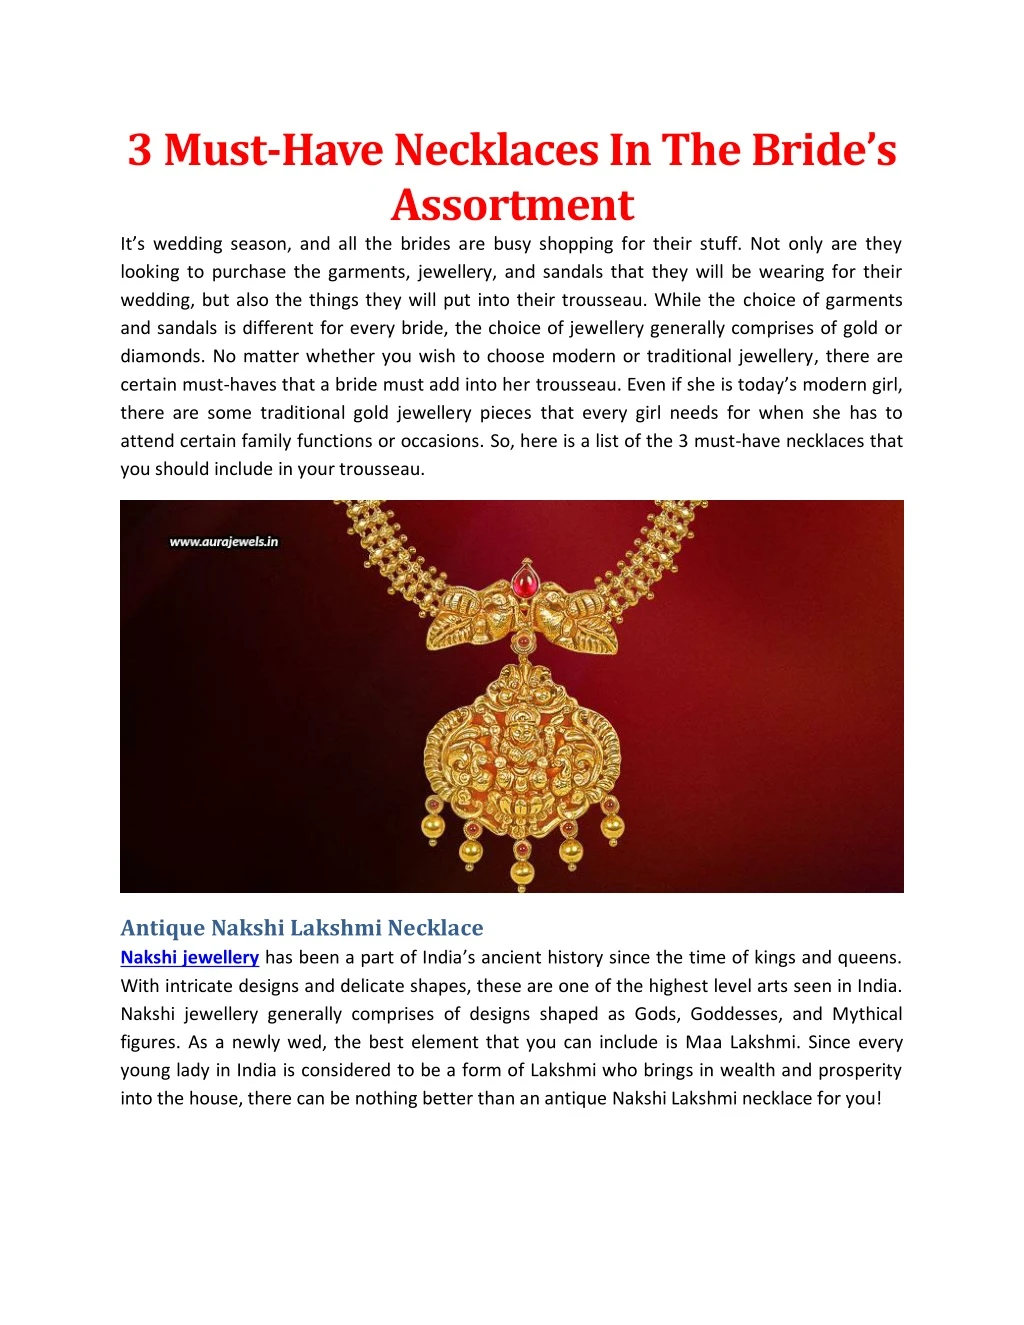 3 must have necklaces in the bride s assortment